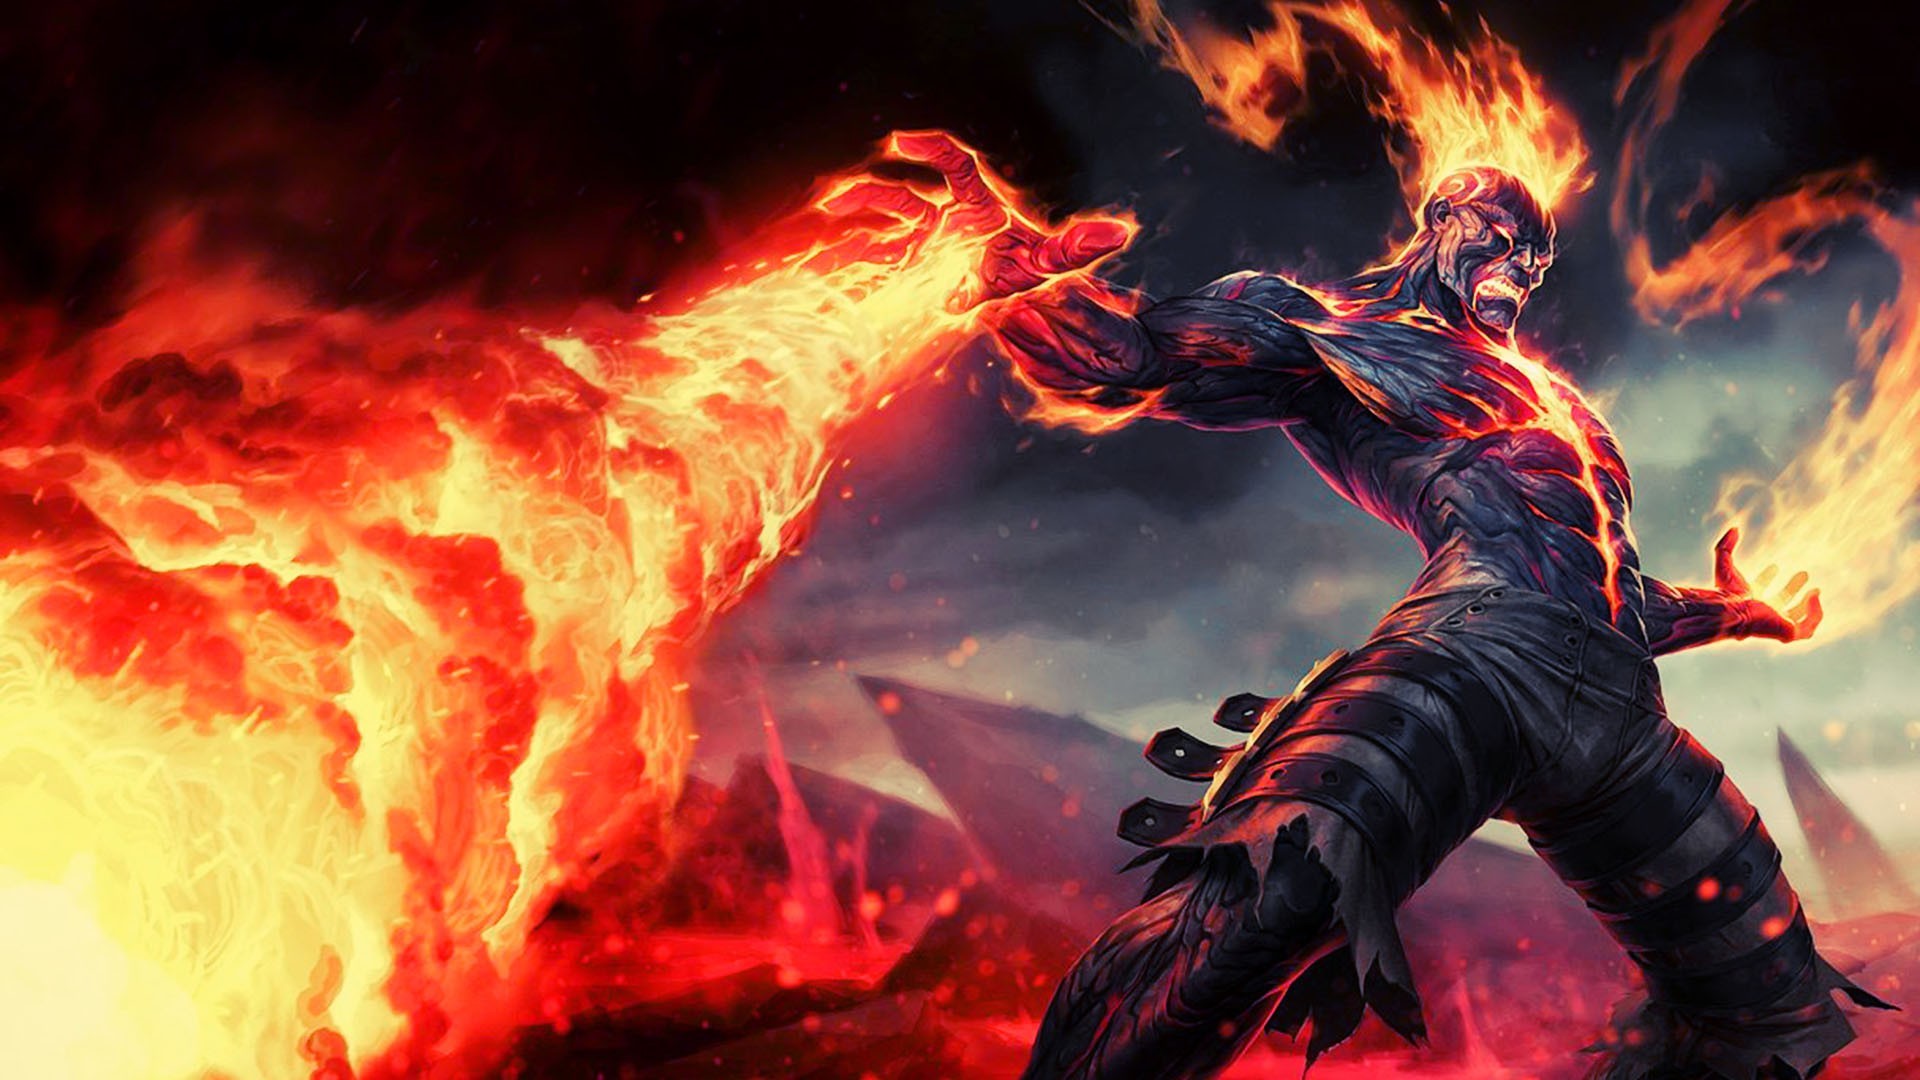 General 1920x1080 brand League of Legends video games PC gaming fire video game art